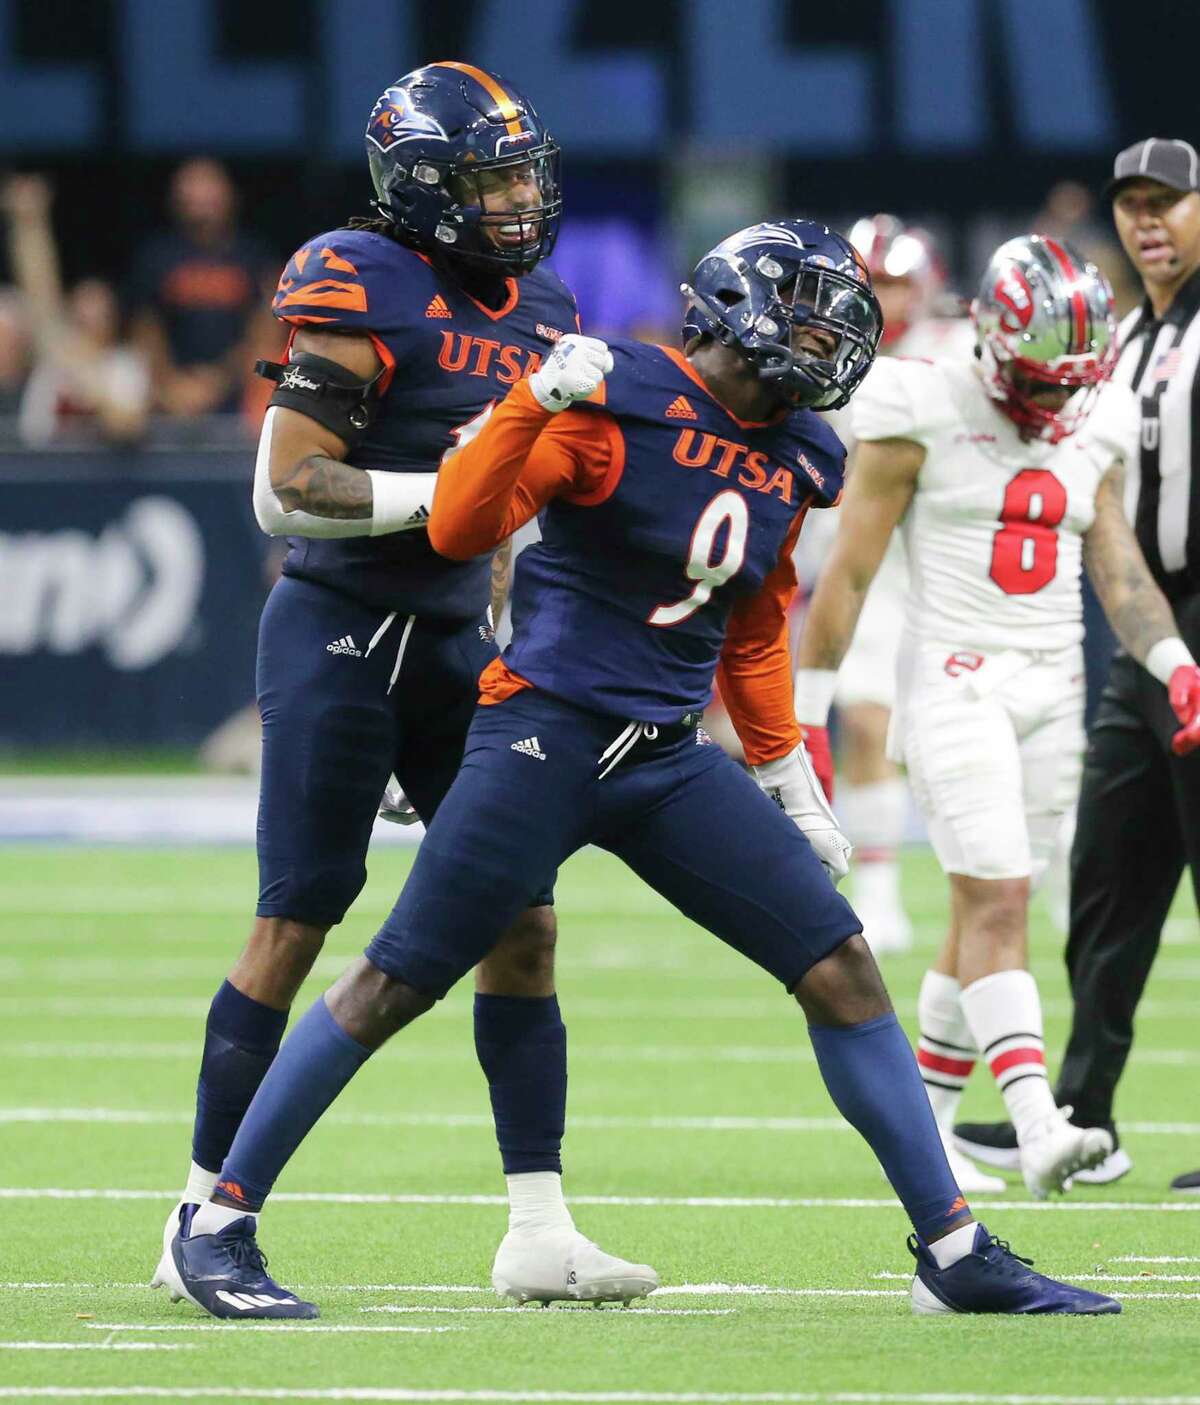 UTSA's Clarence Hicks (09) ?celebrates after sacking Western Kentucky quarterback Bailey Zappe (04) during the 2021 Conference USA Championship football game at the Alamodome on Friday, Dec. 3, 2021.